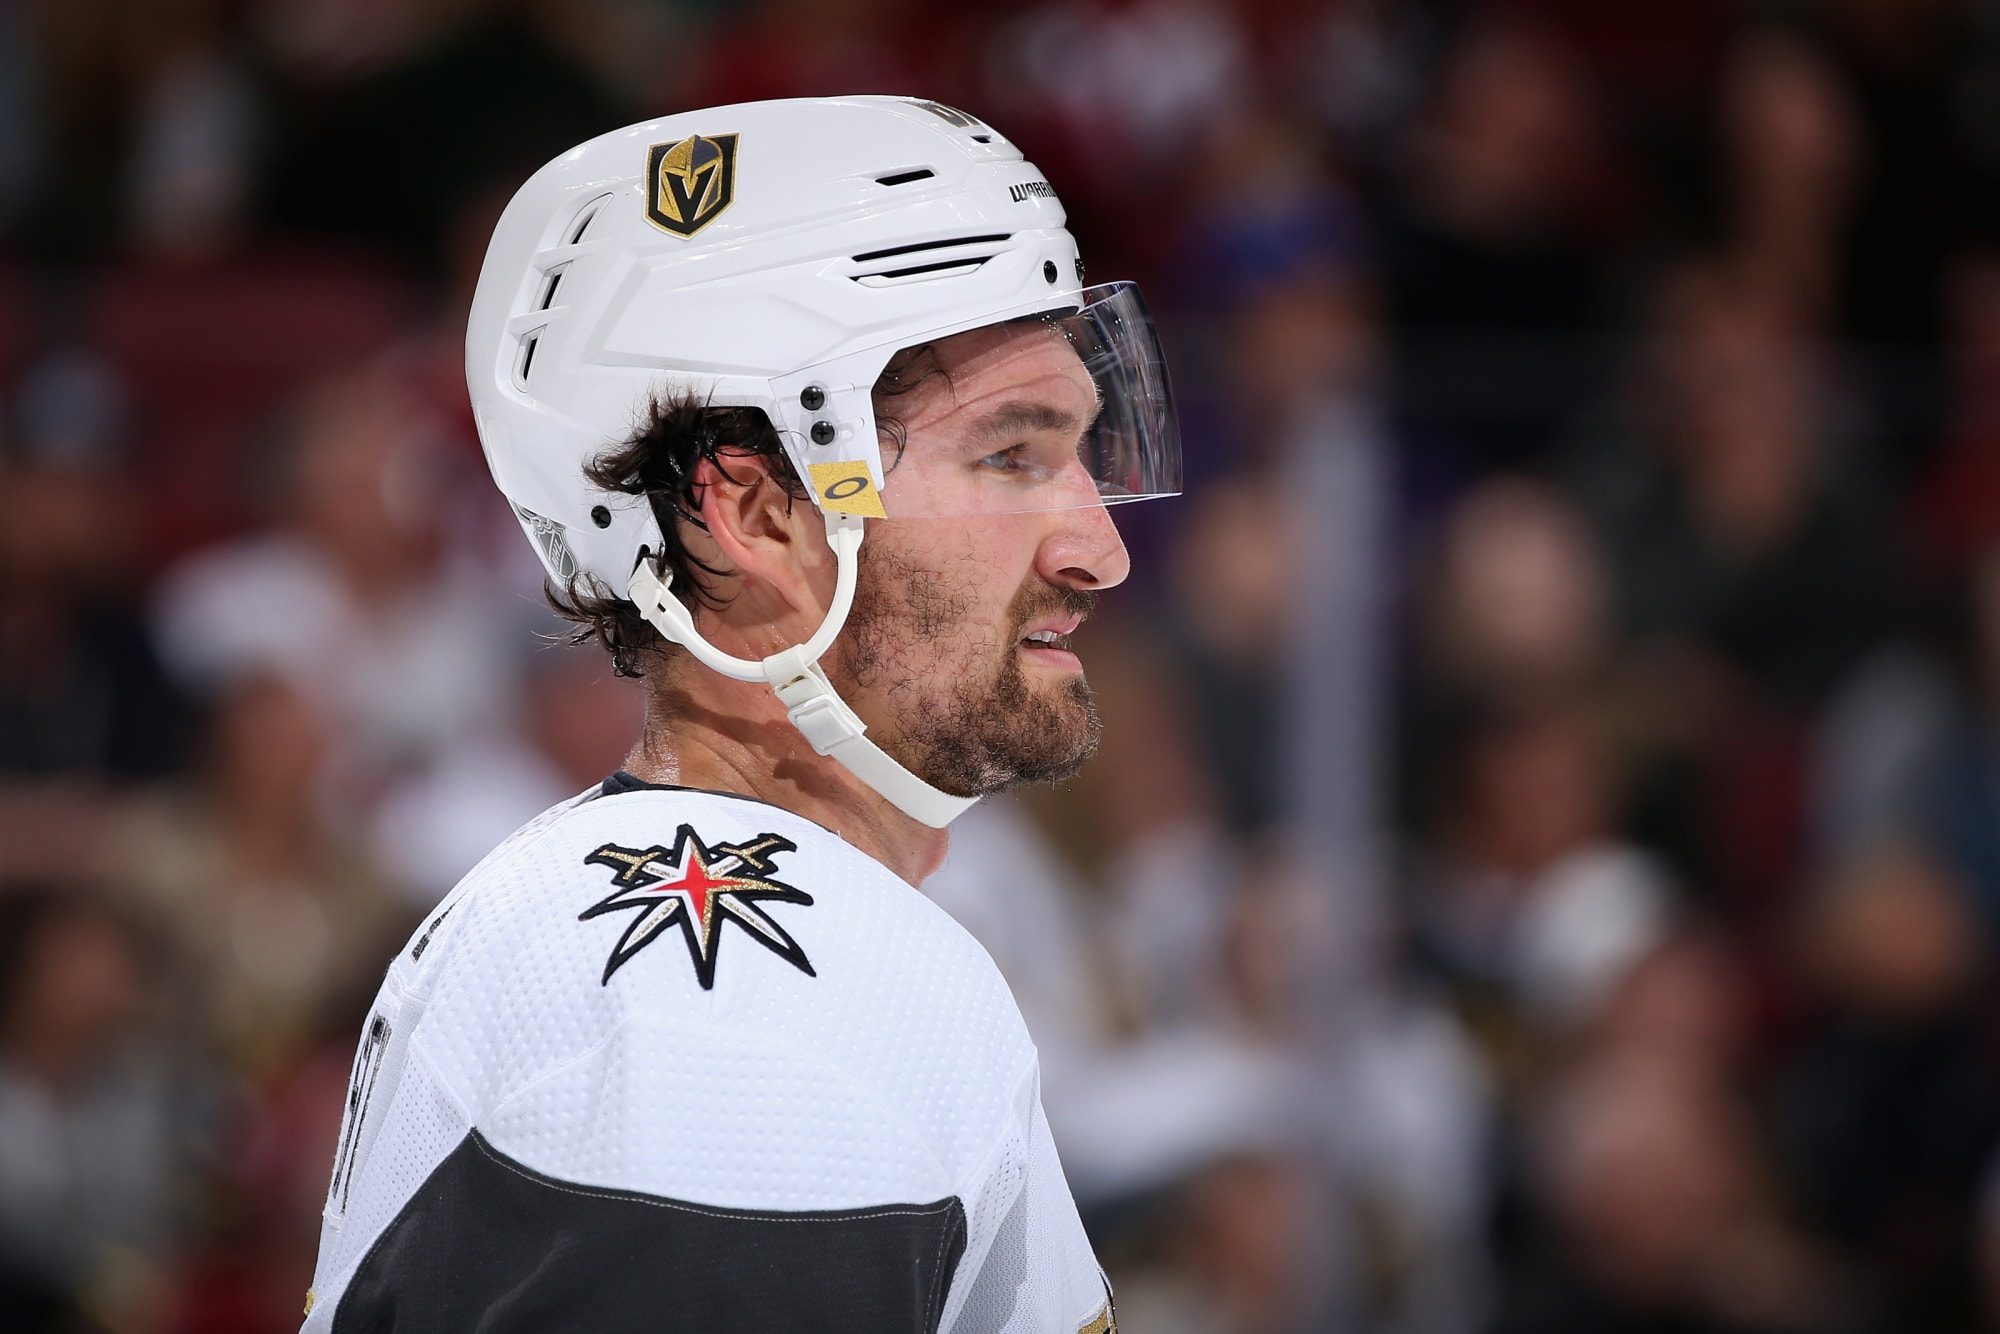 Golden Knight's Mark Stone On The Ice With Team in No-Contact